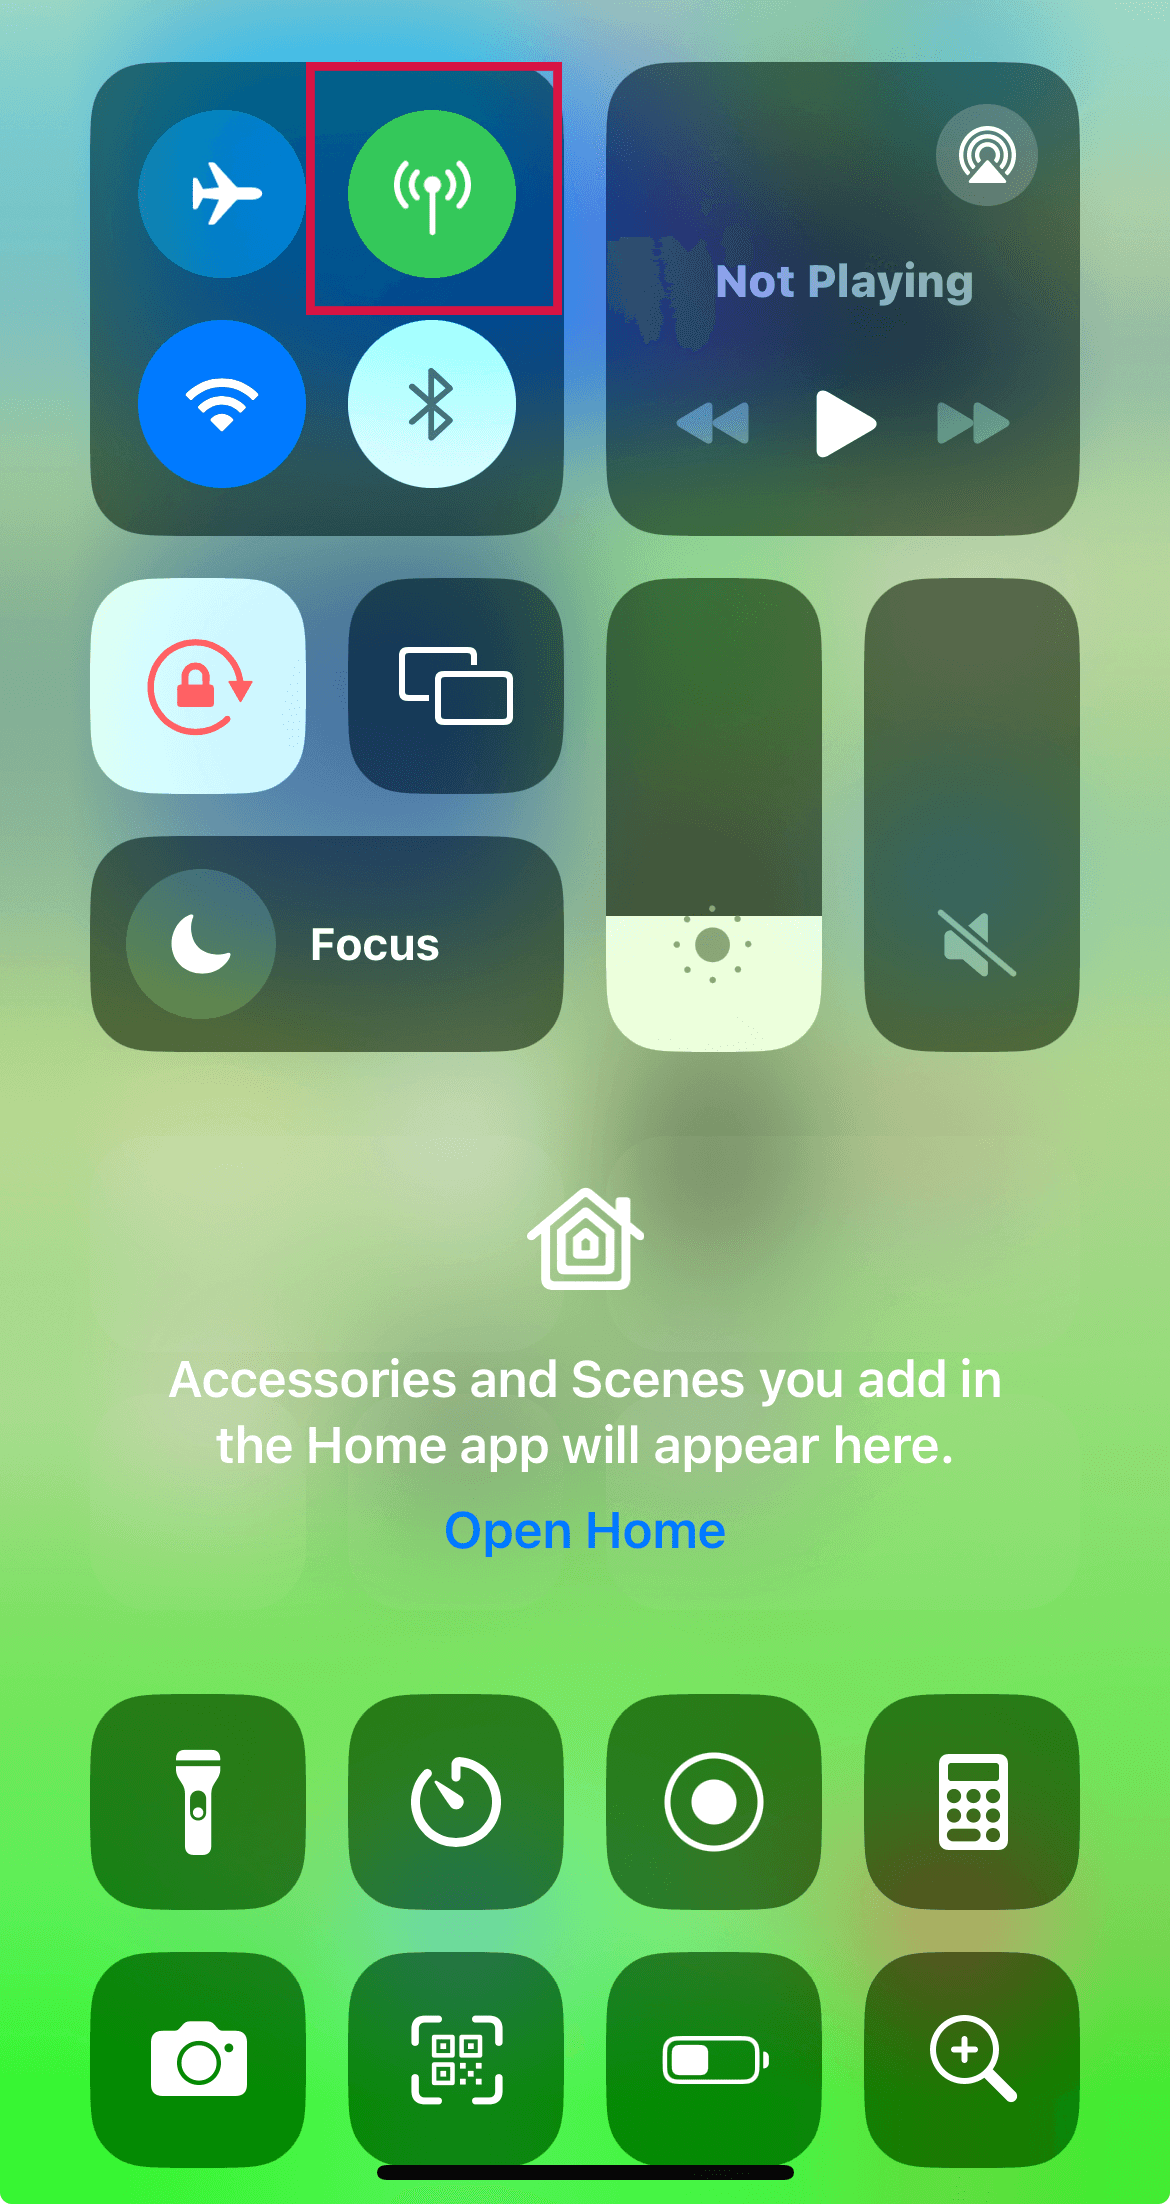 Turn Cellular Data On or Off from iPhone Control Center